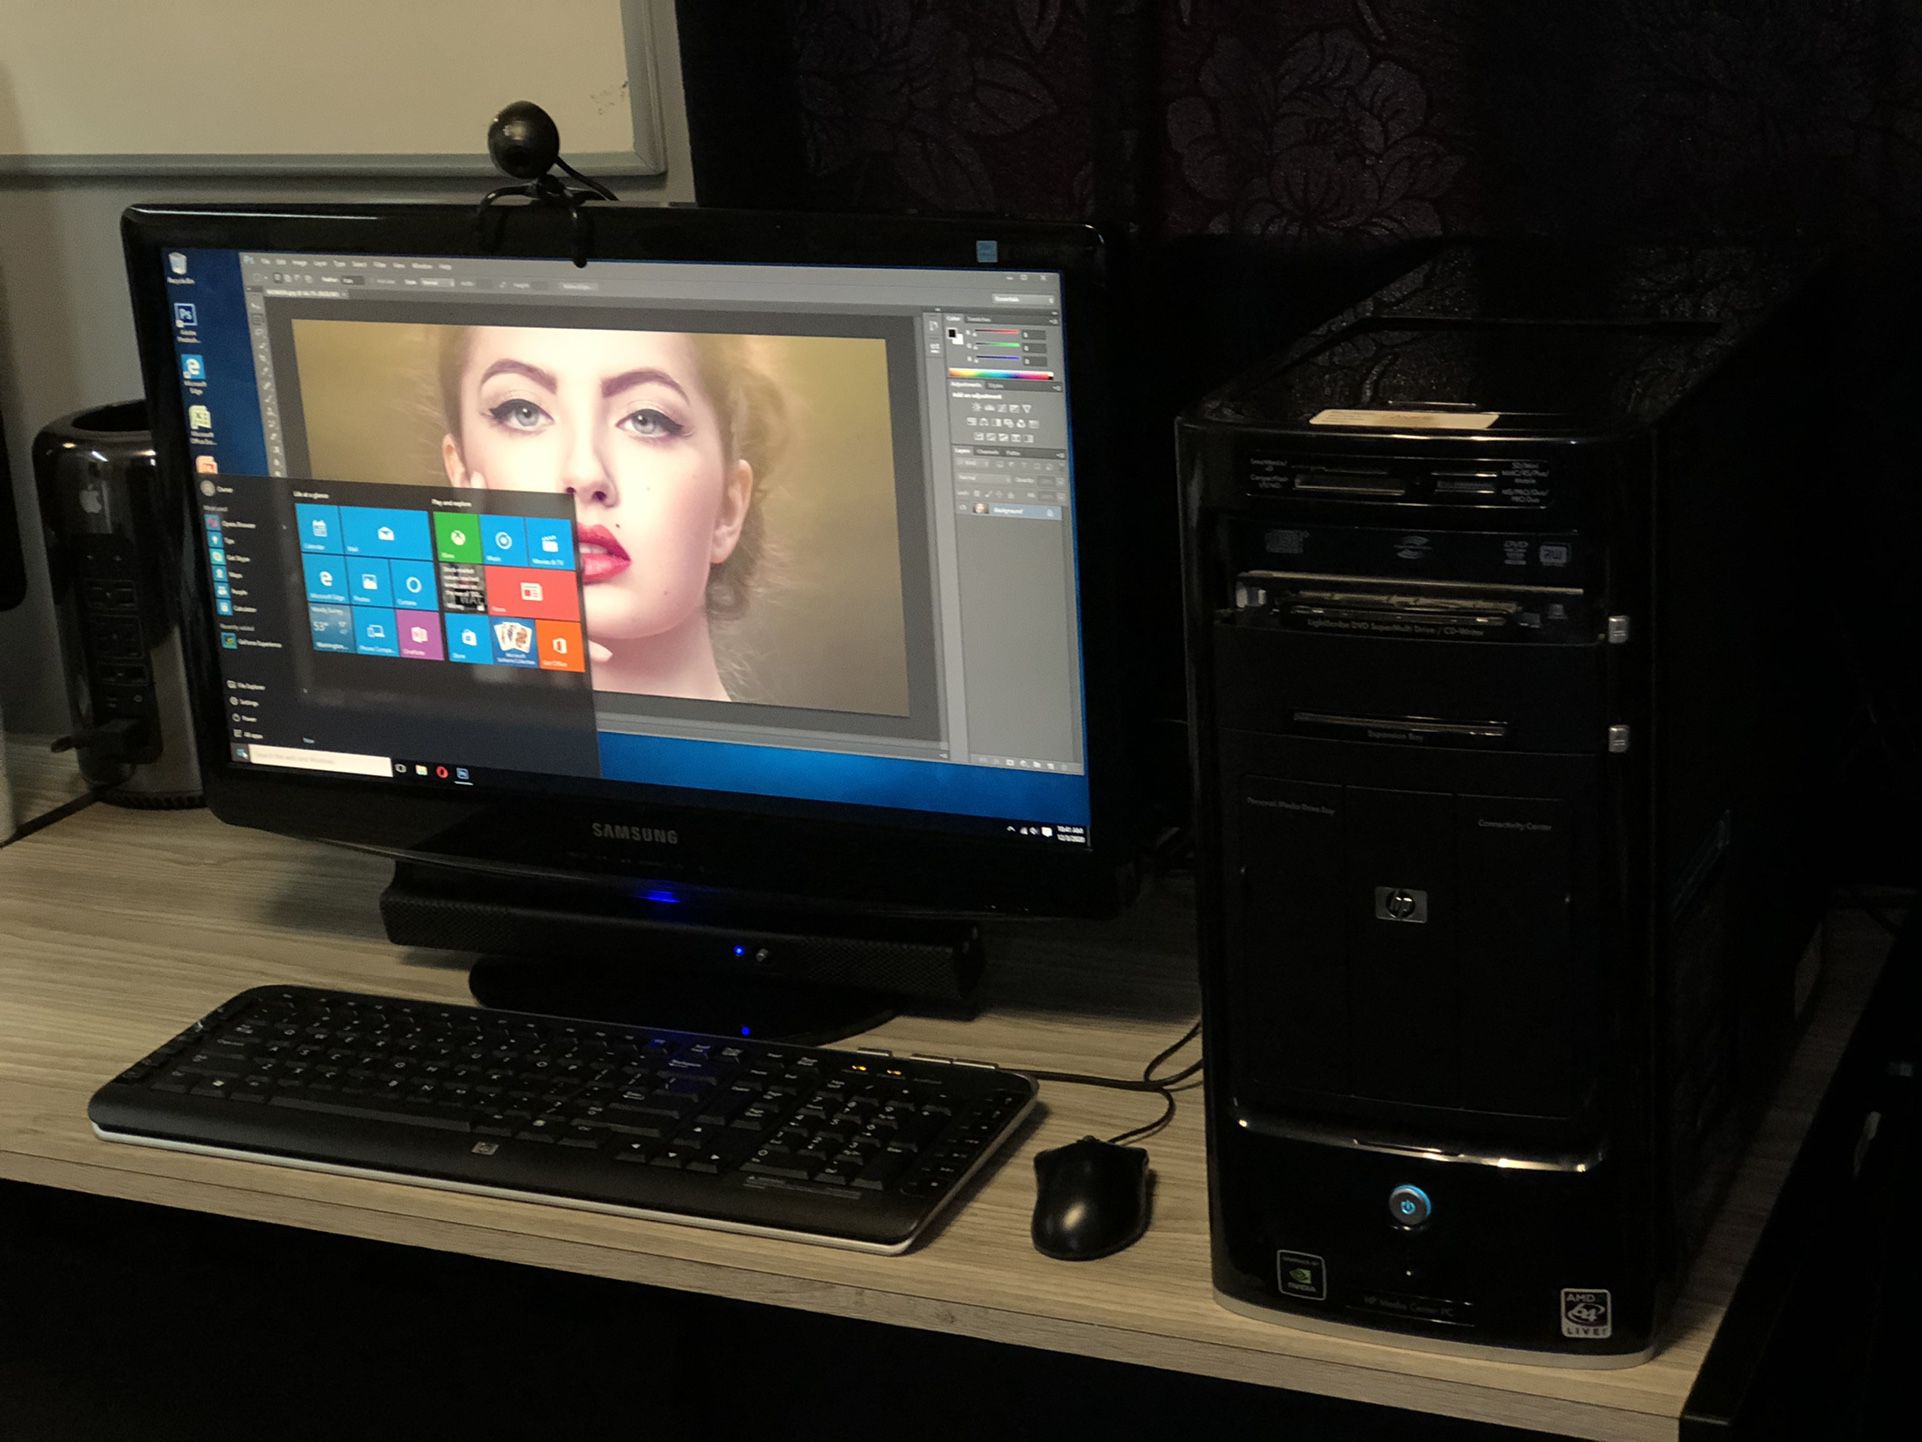 HP MEDIA CENTER PC Windows 10 Fast Computer. Adobe Photoshop And word Excel Power Point Installed